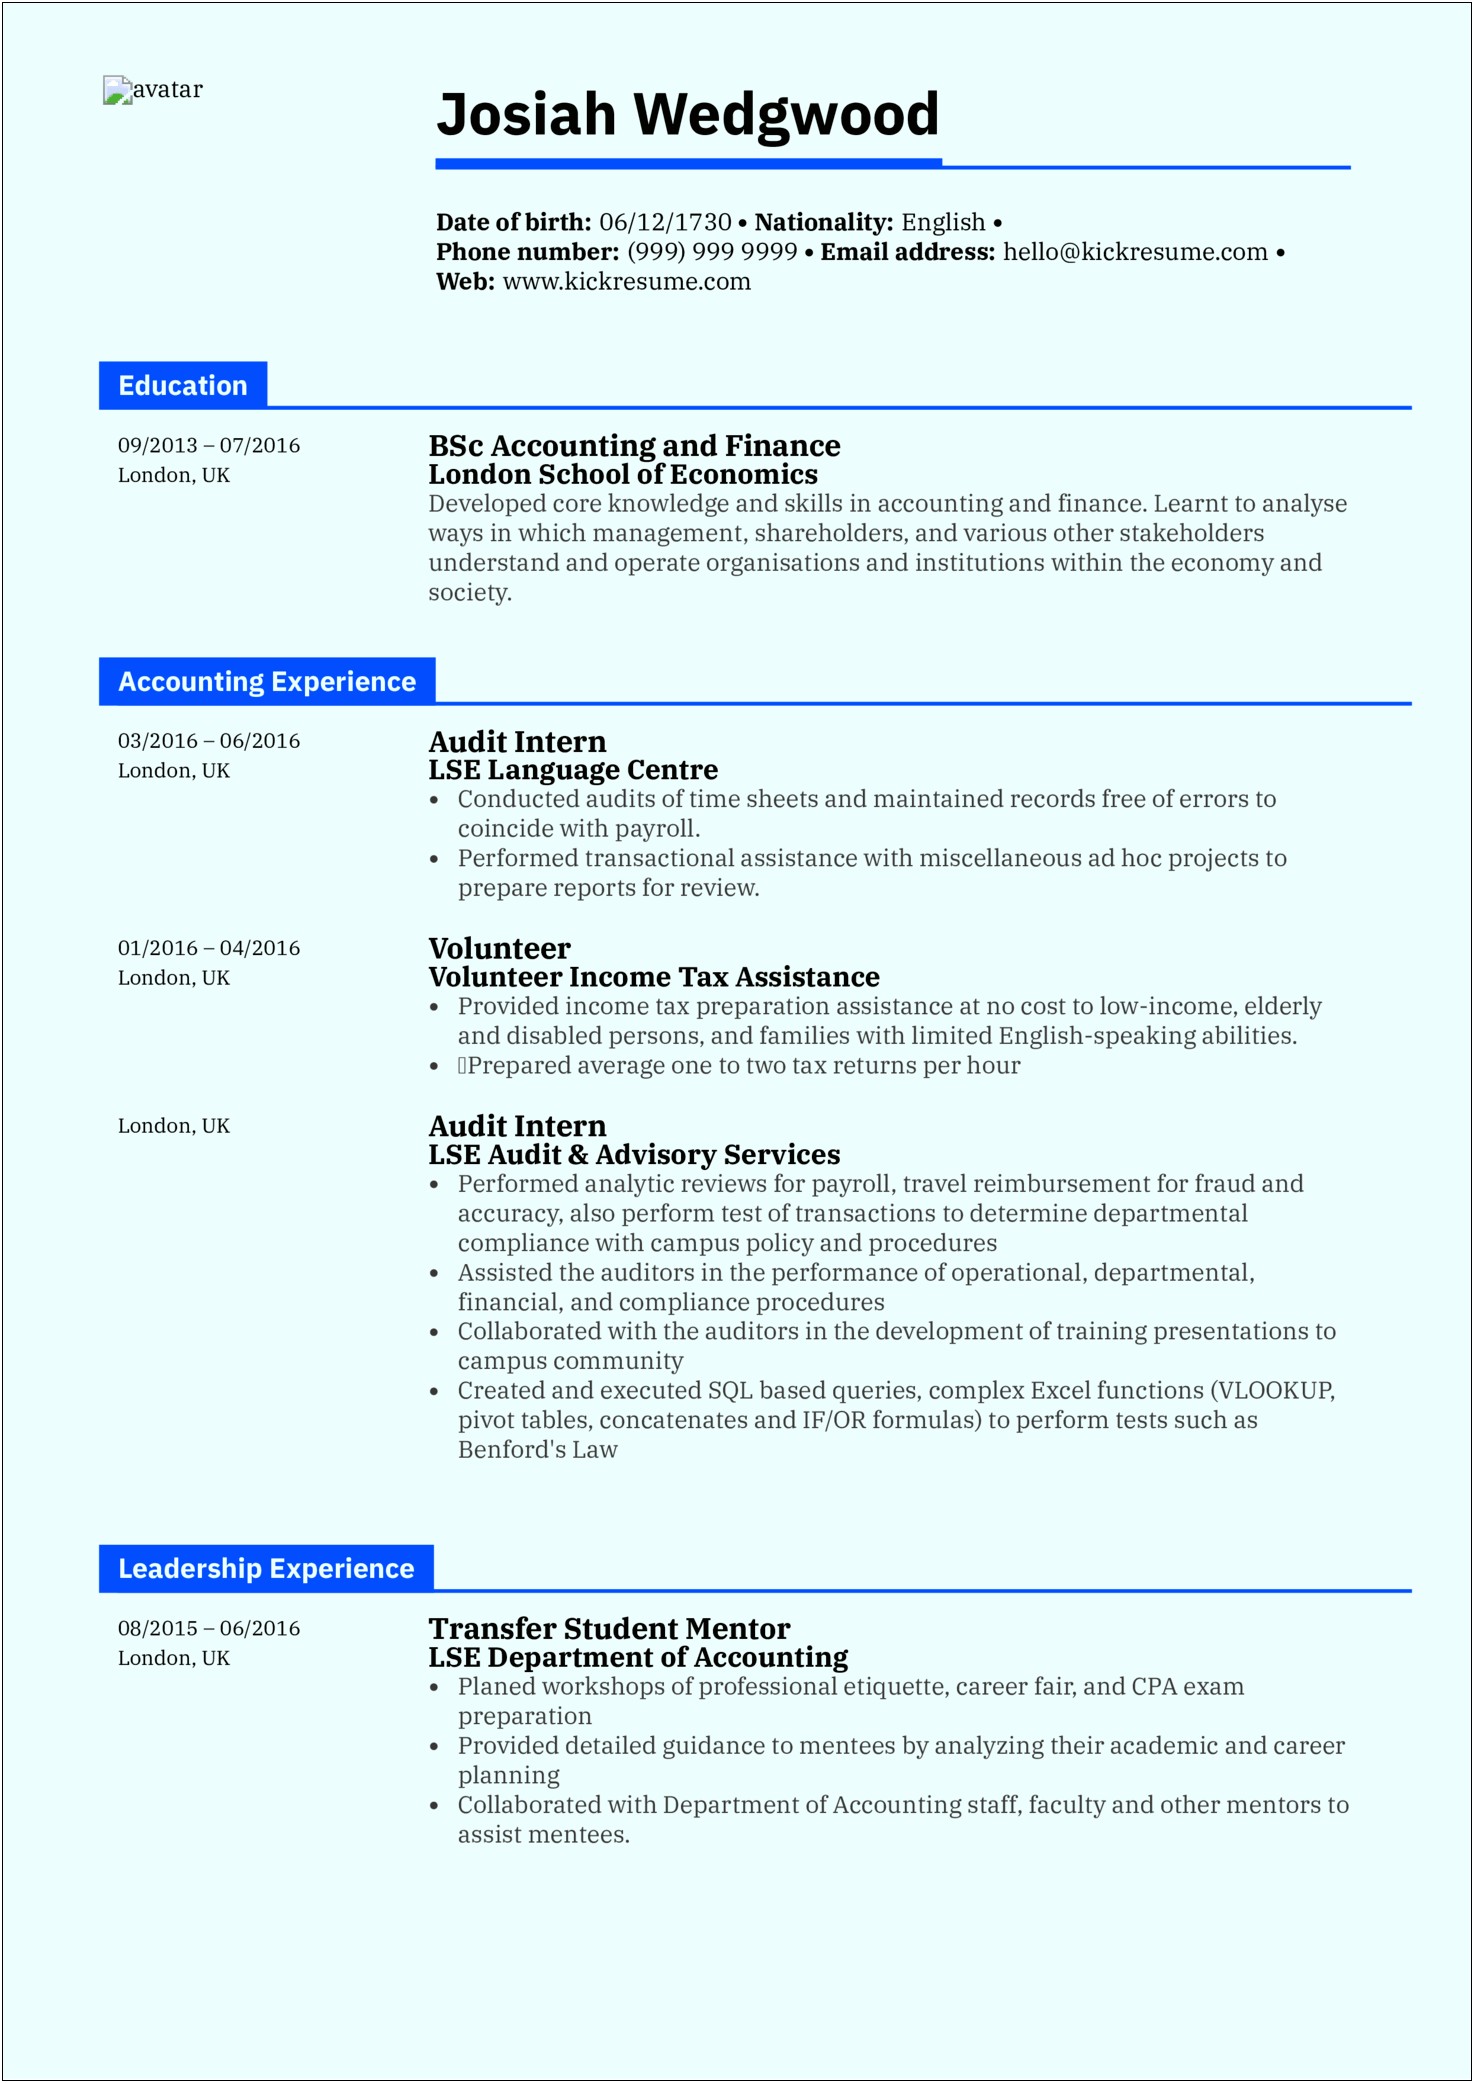 Resume Objective Examples For Accounting Internships